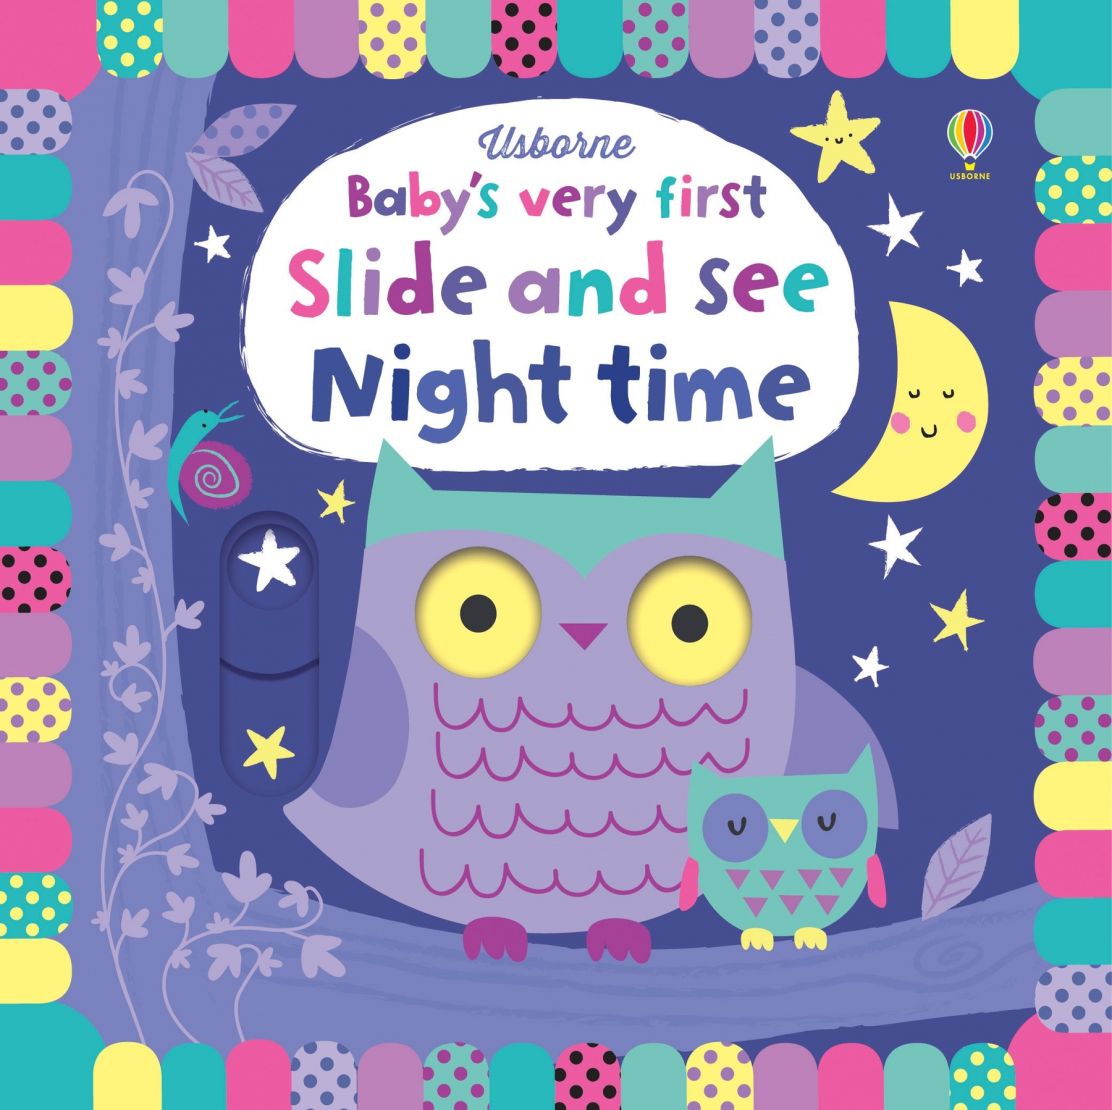 Usborne Baby's Very First Books (Slide and See Night Time)